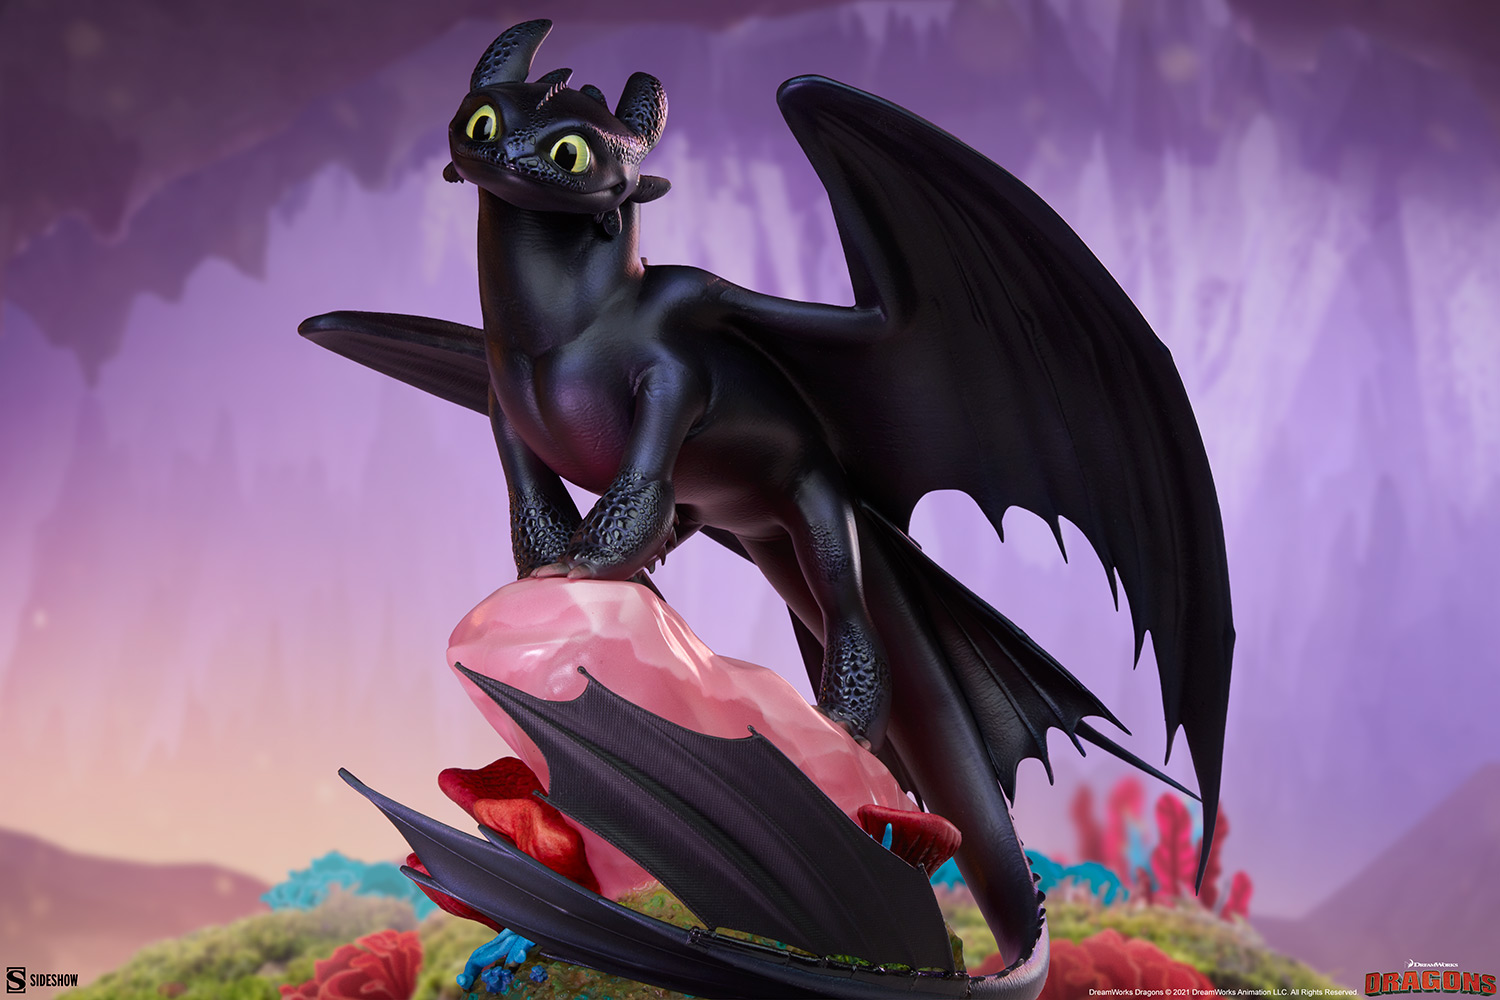 Pre-Order Sideshow Toothless How to Train Your Dragon Statue